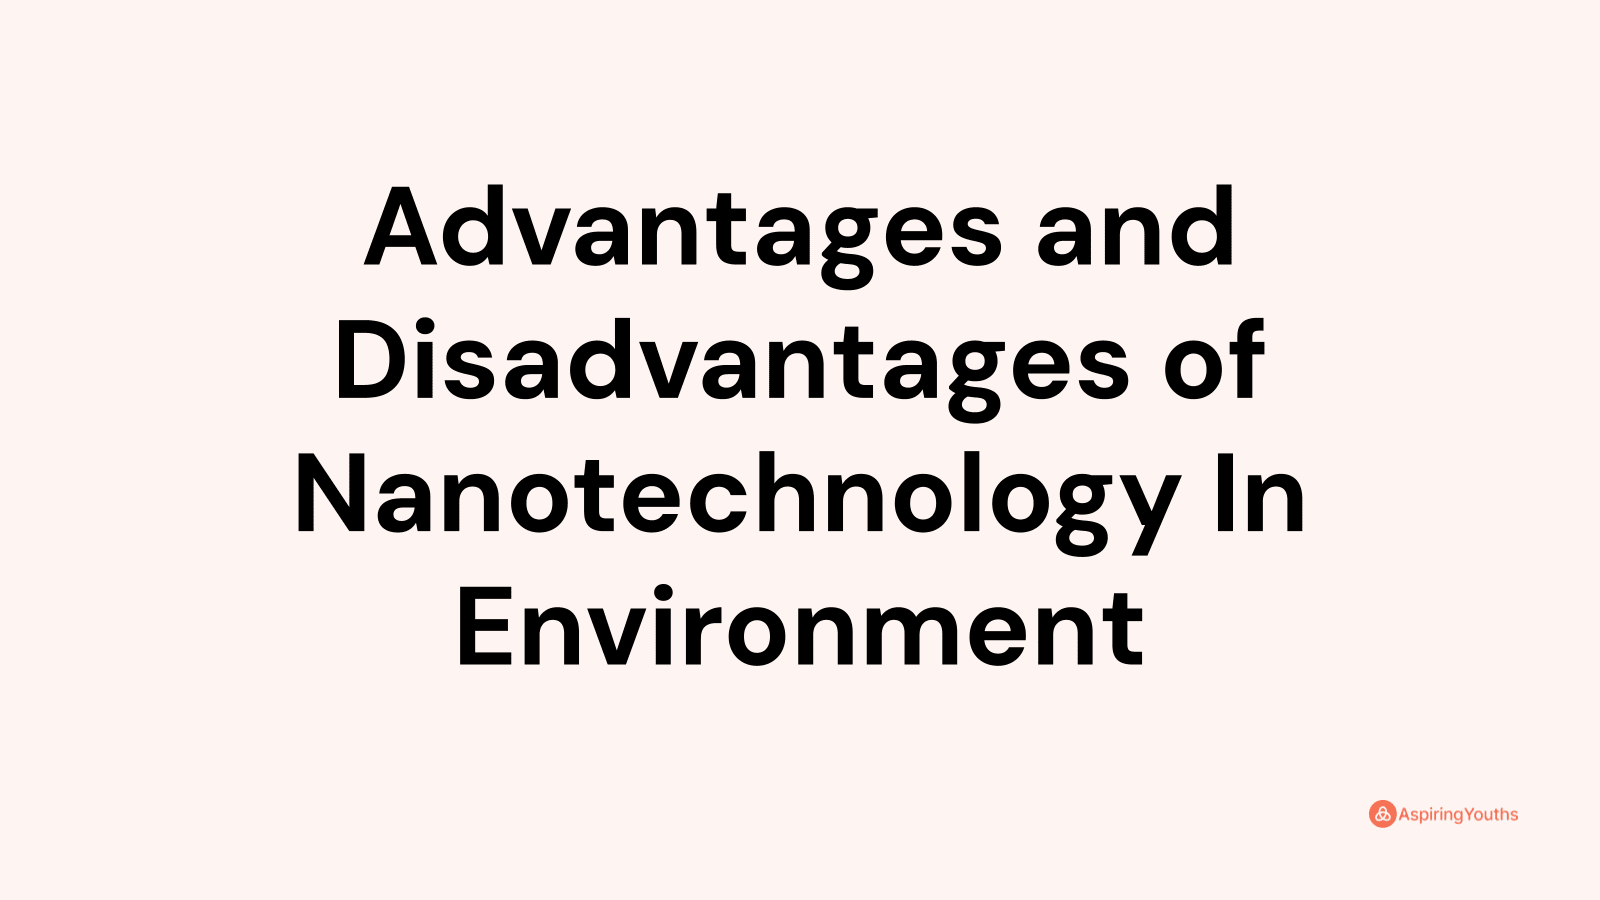 Advantages and disadvantages of Nanotechnology In Environment